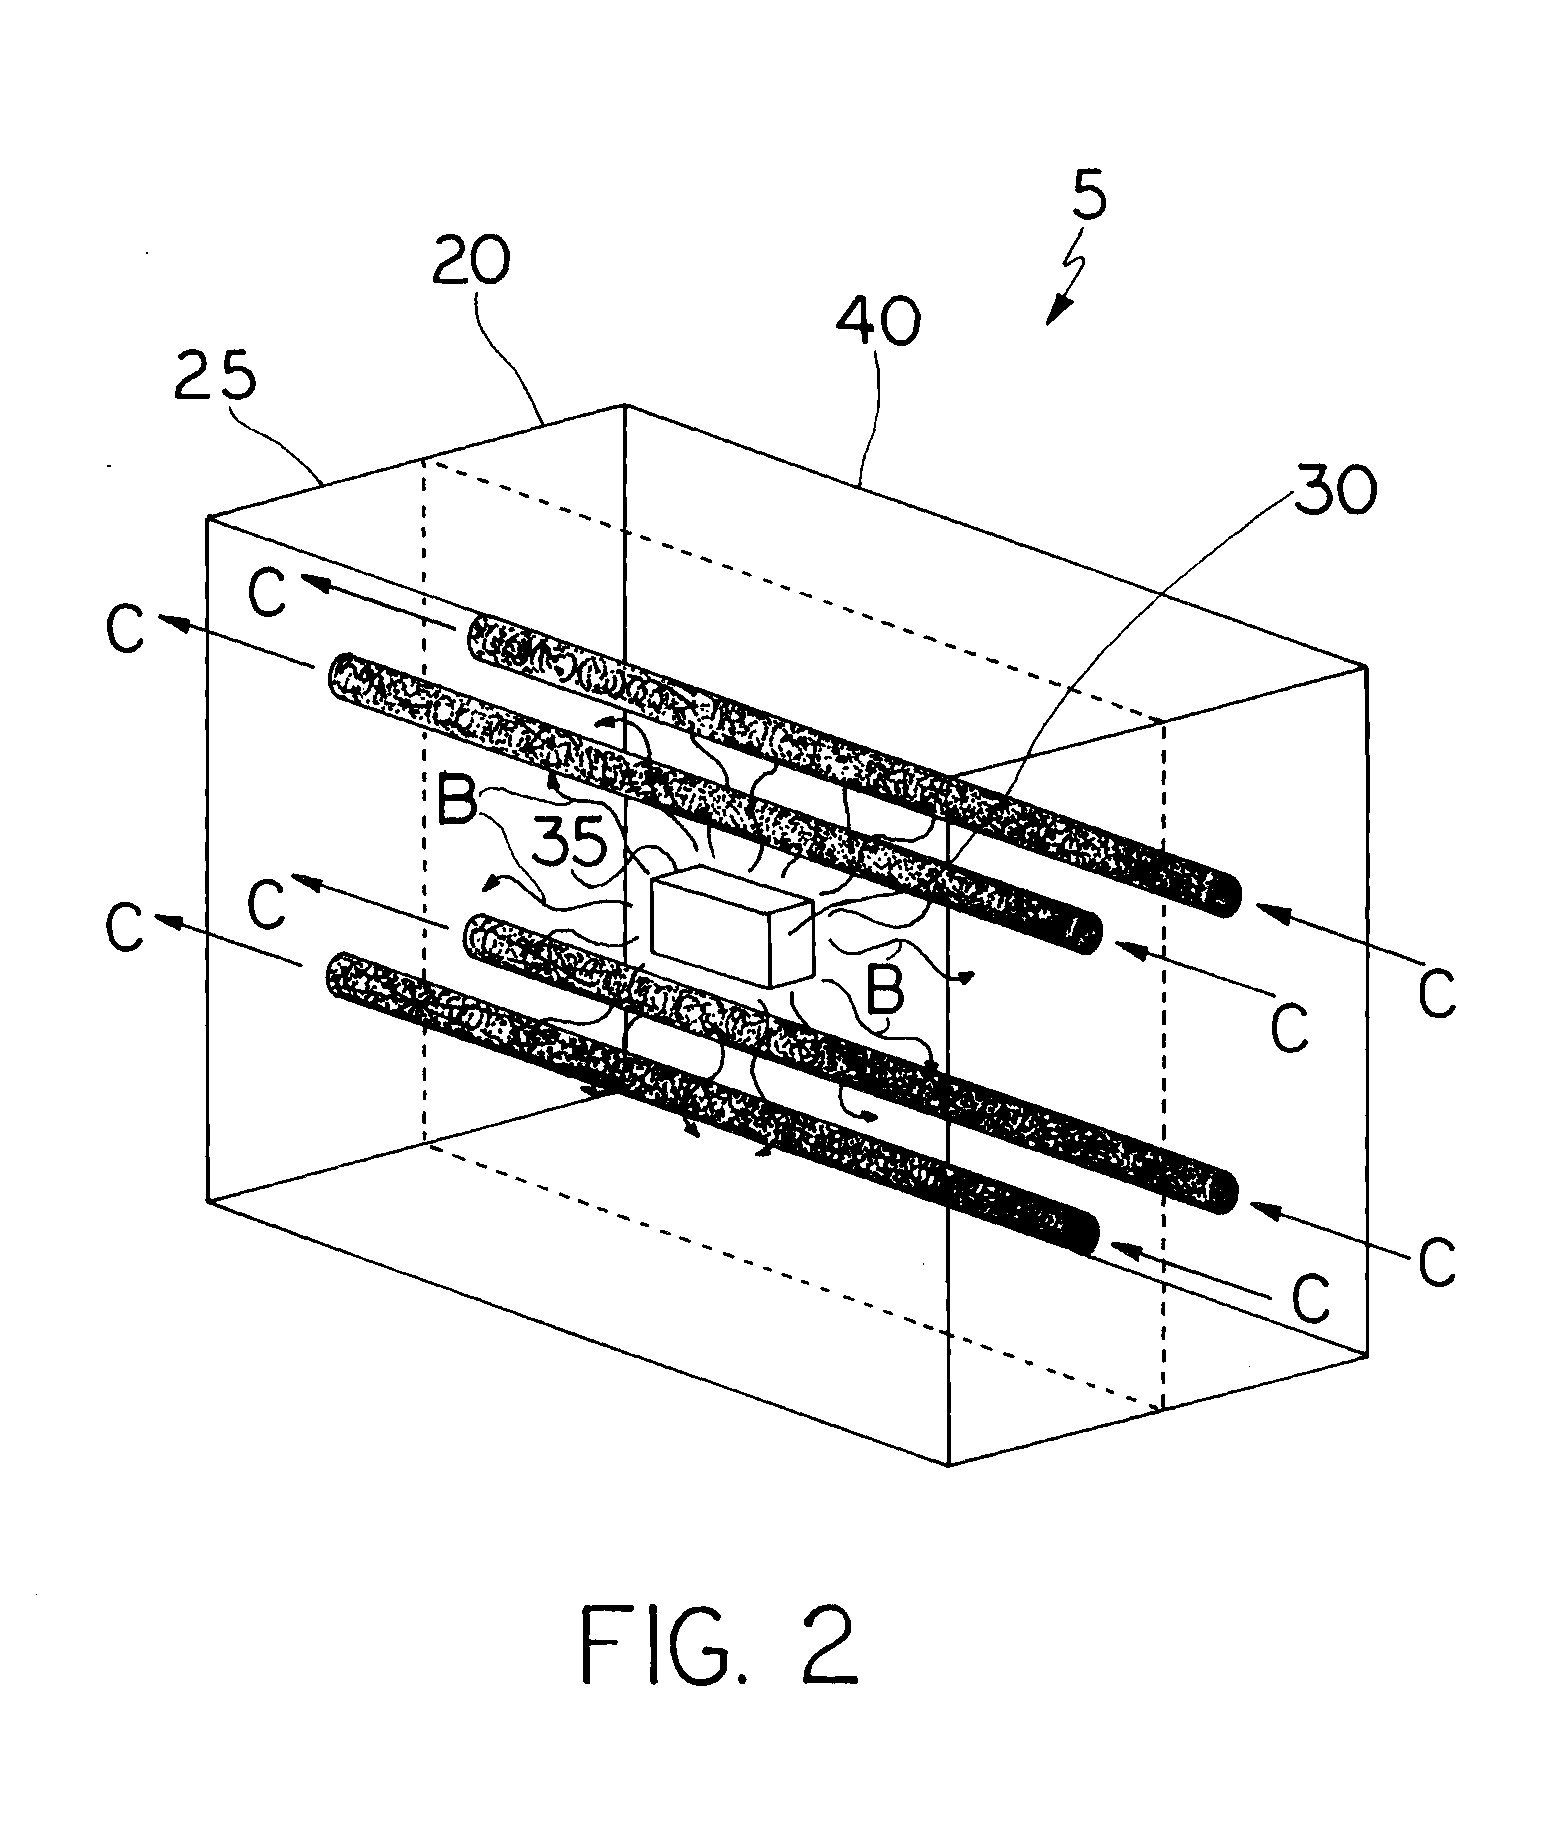 Molding apparatus and method with heat recovery